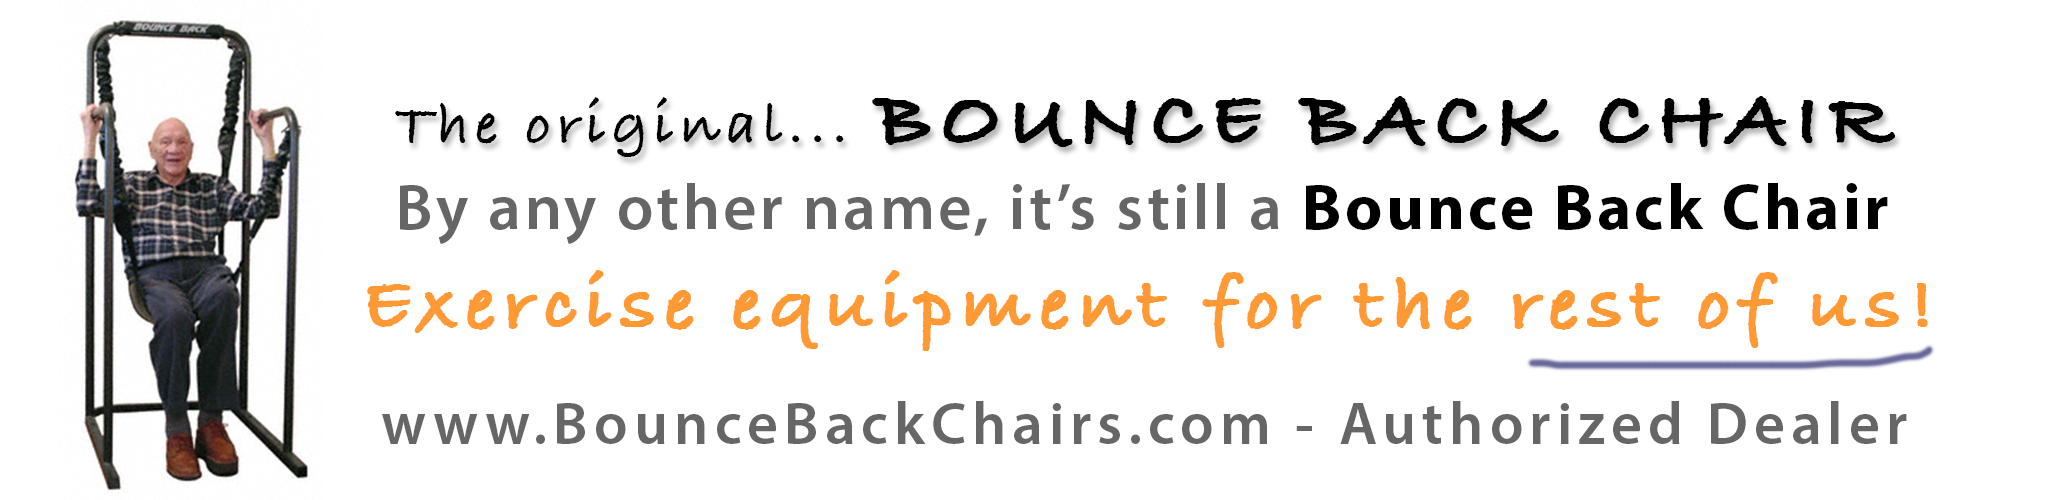 Bounce Back Chairs banner